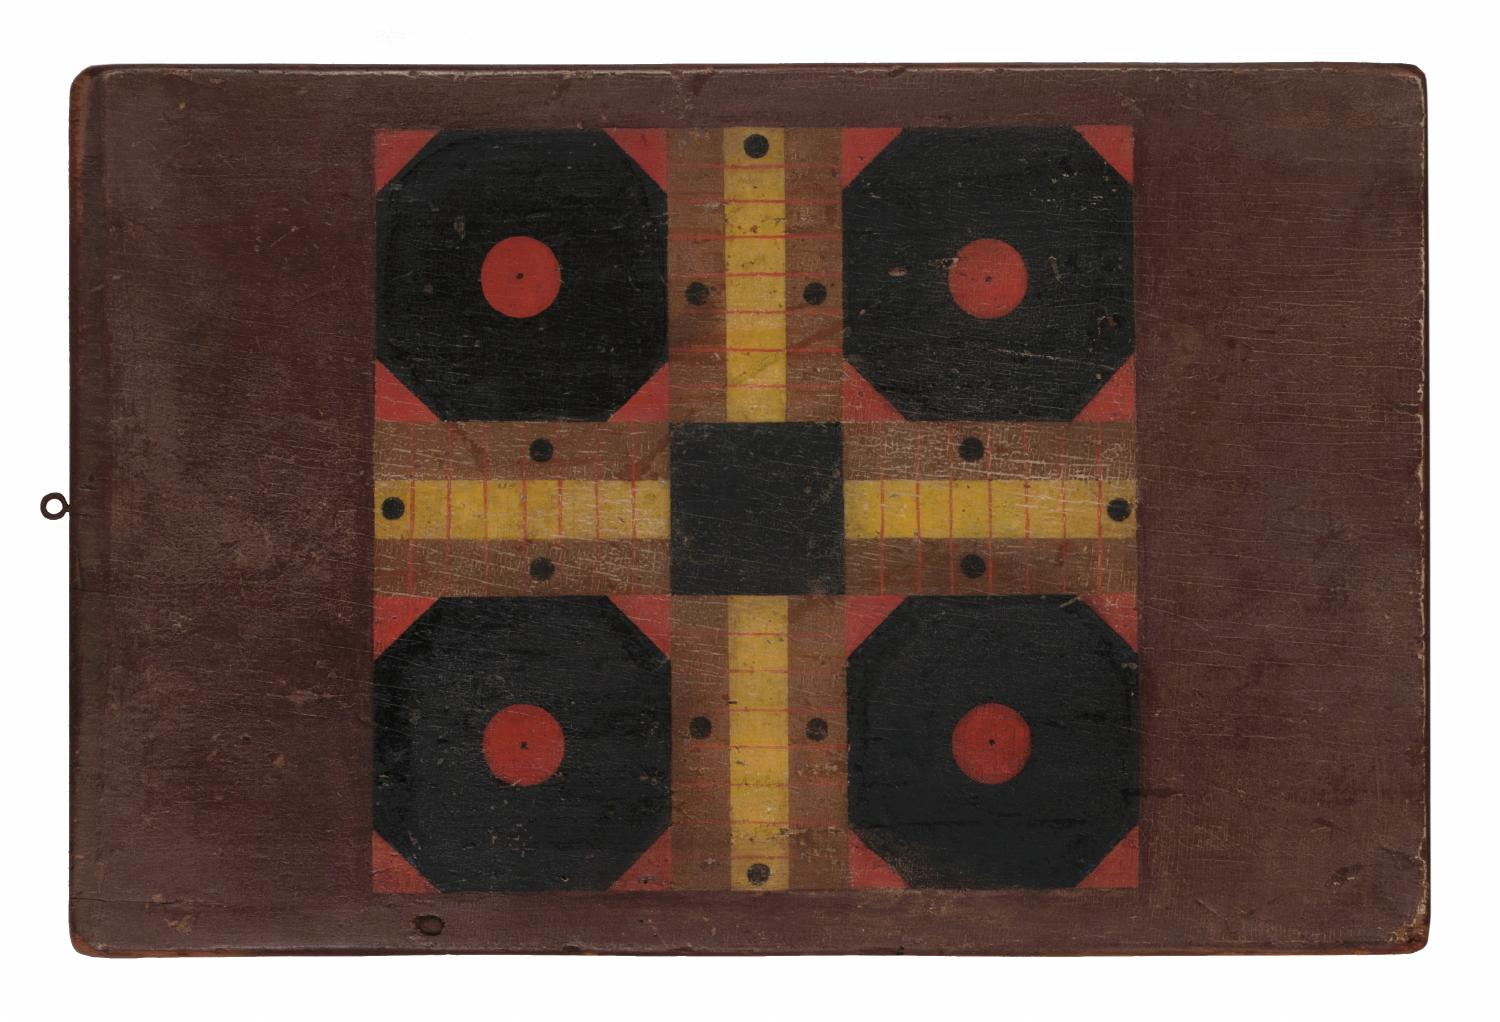 19th century American Parcheesi board in four colors, with great surface and interesting graphics, circa 1850-1870

19th century American Parcheesi game board in black, gold, and yellow, on a rich, chocolate brown background with very attractive